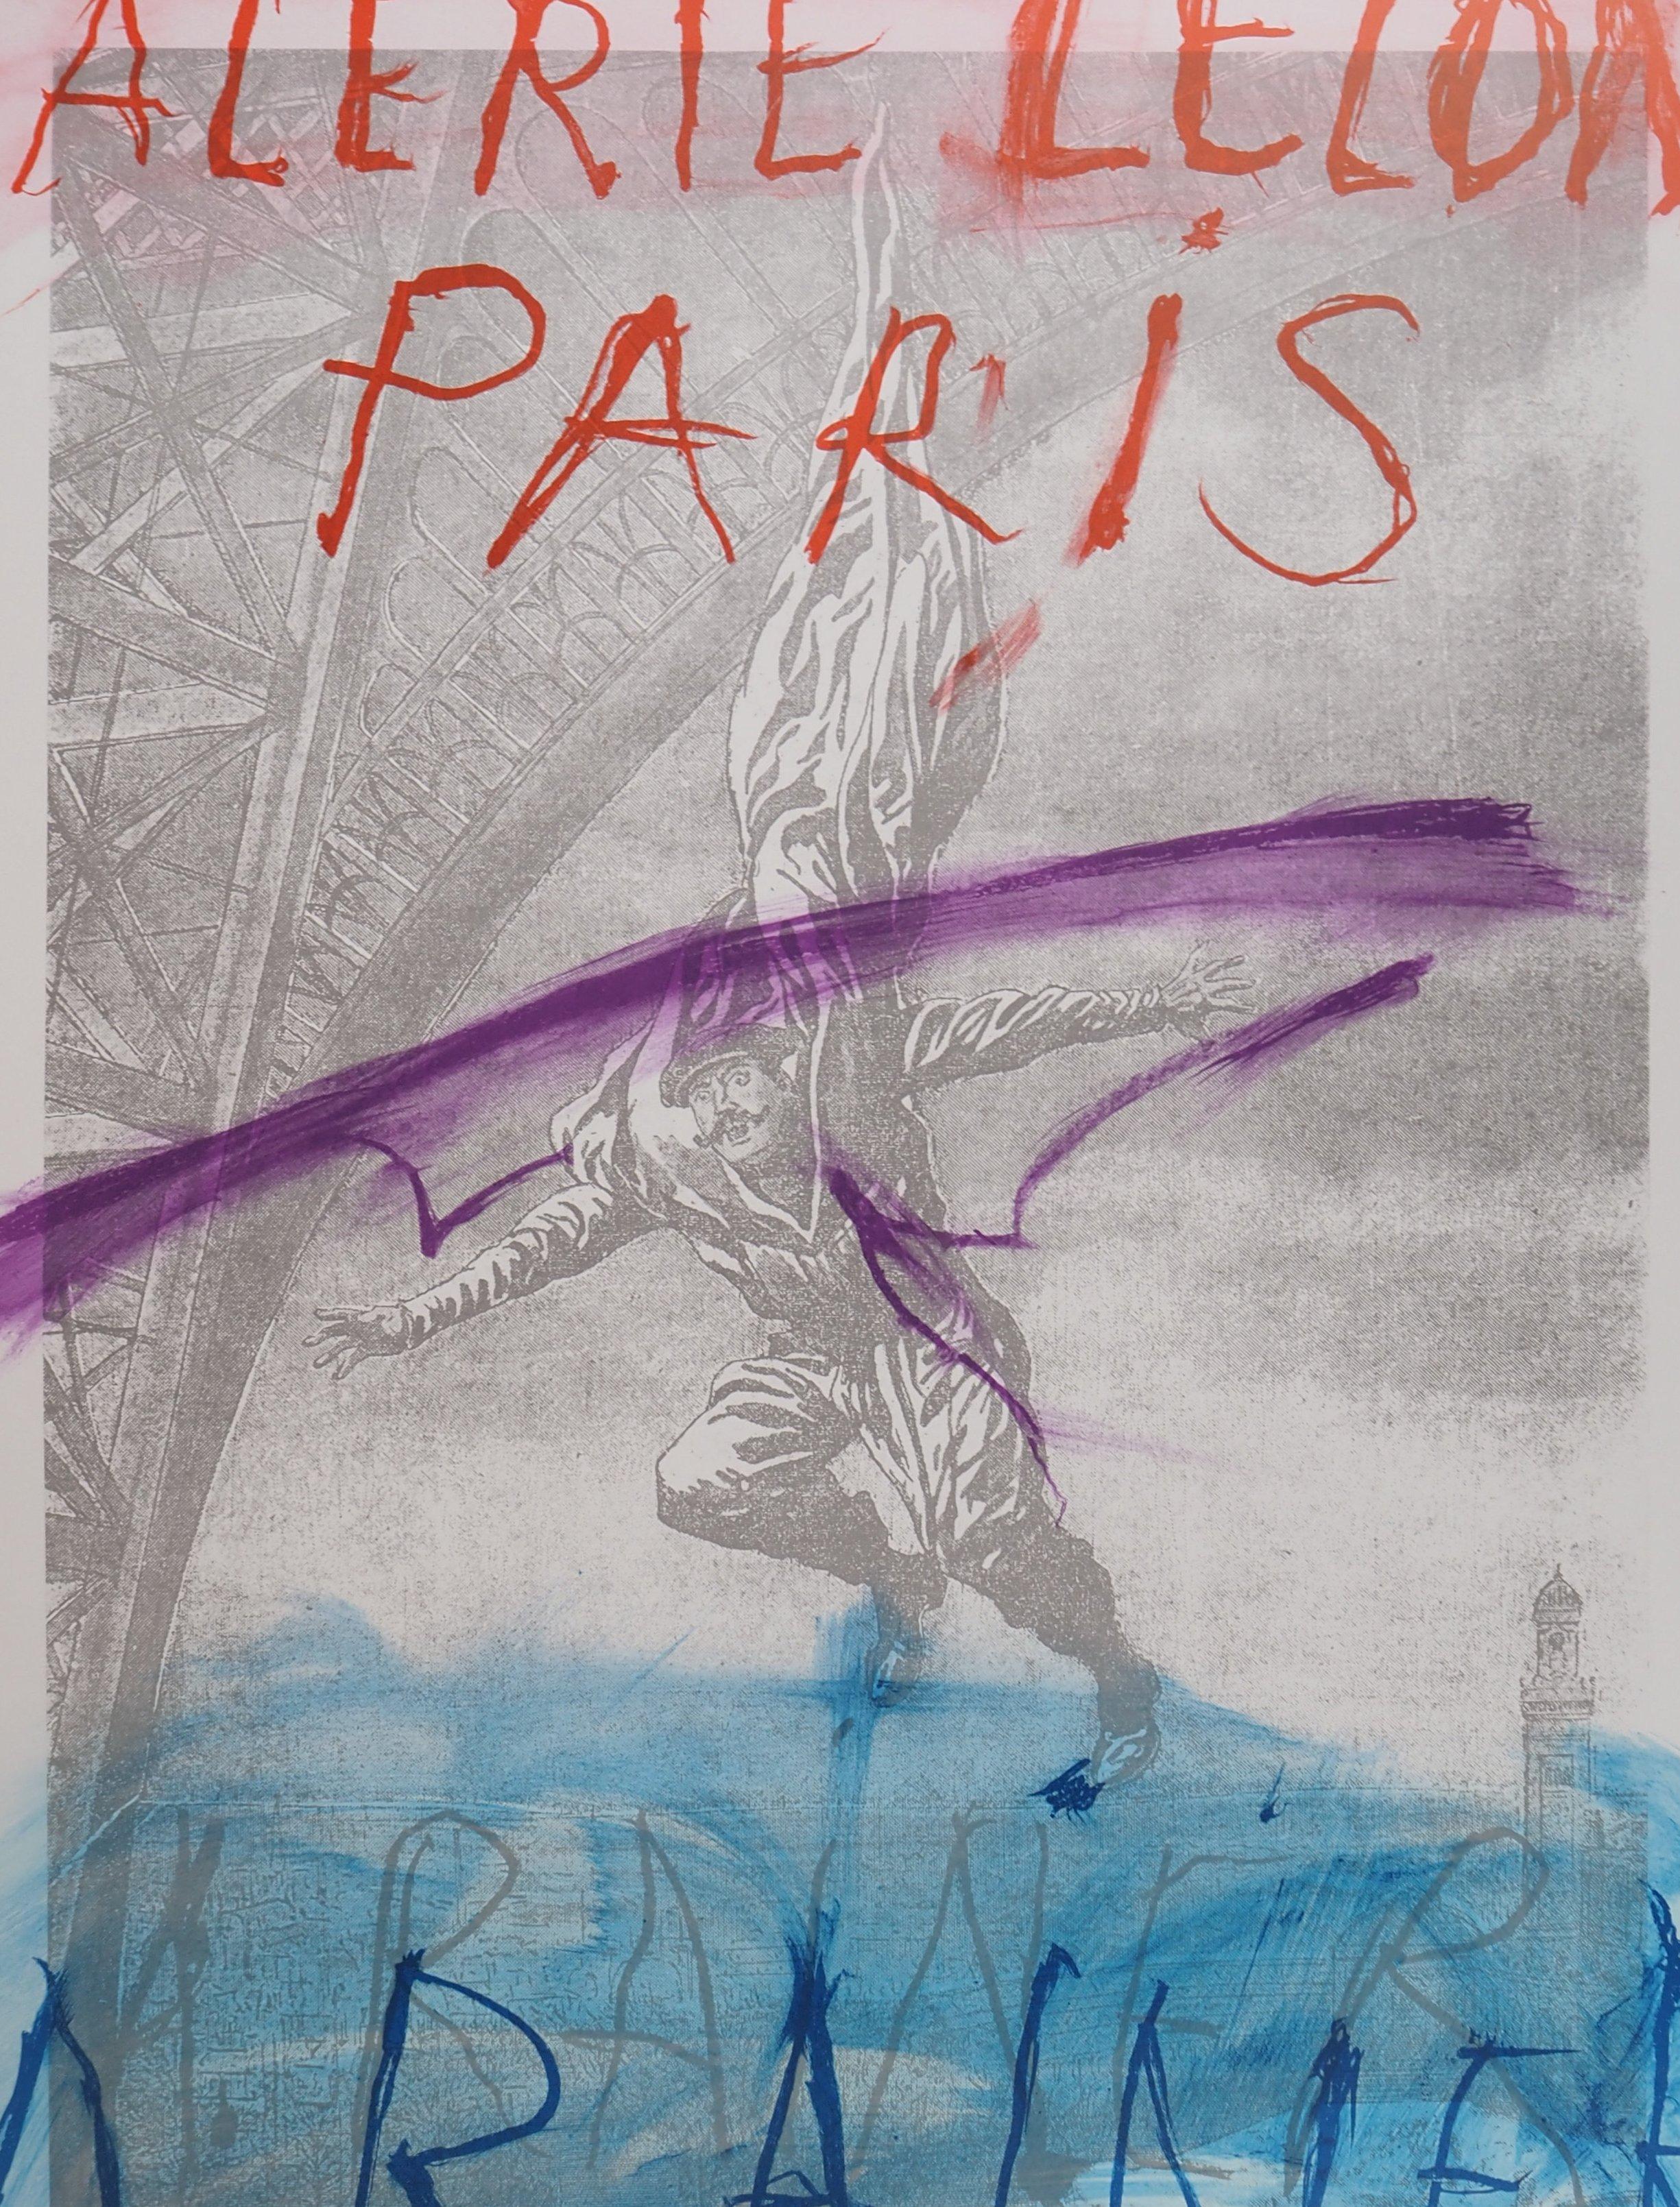 Eiffel Tower and Informal Composition - Original Vintage Lithographic Poster - Print by Arnulf Rainer